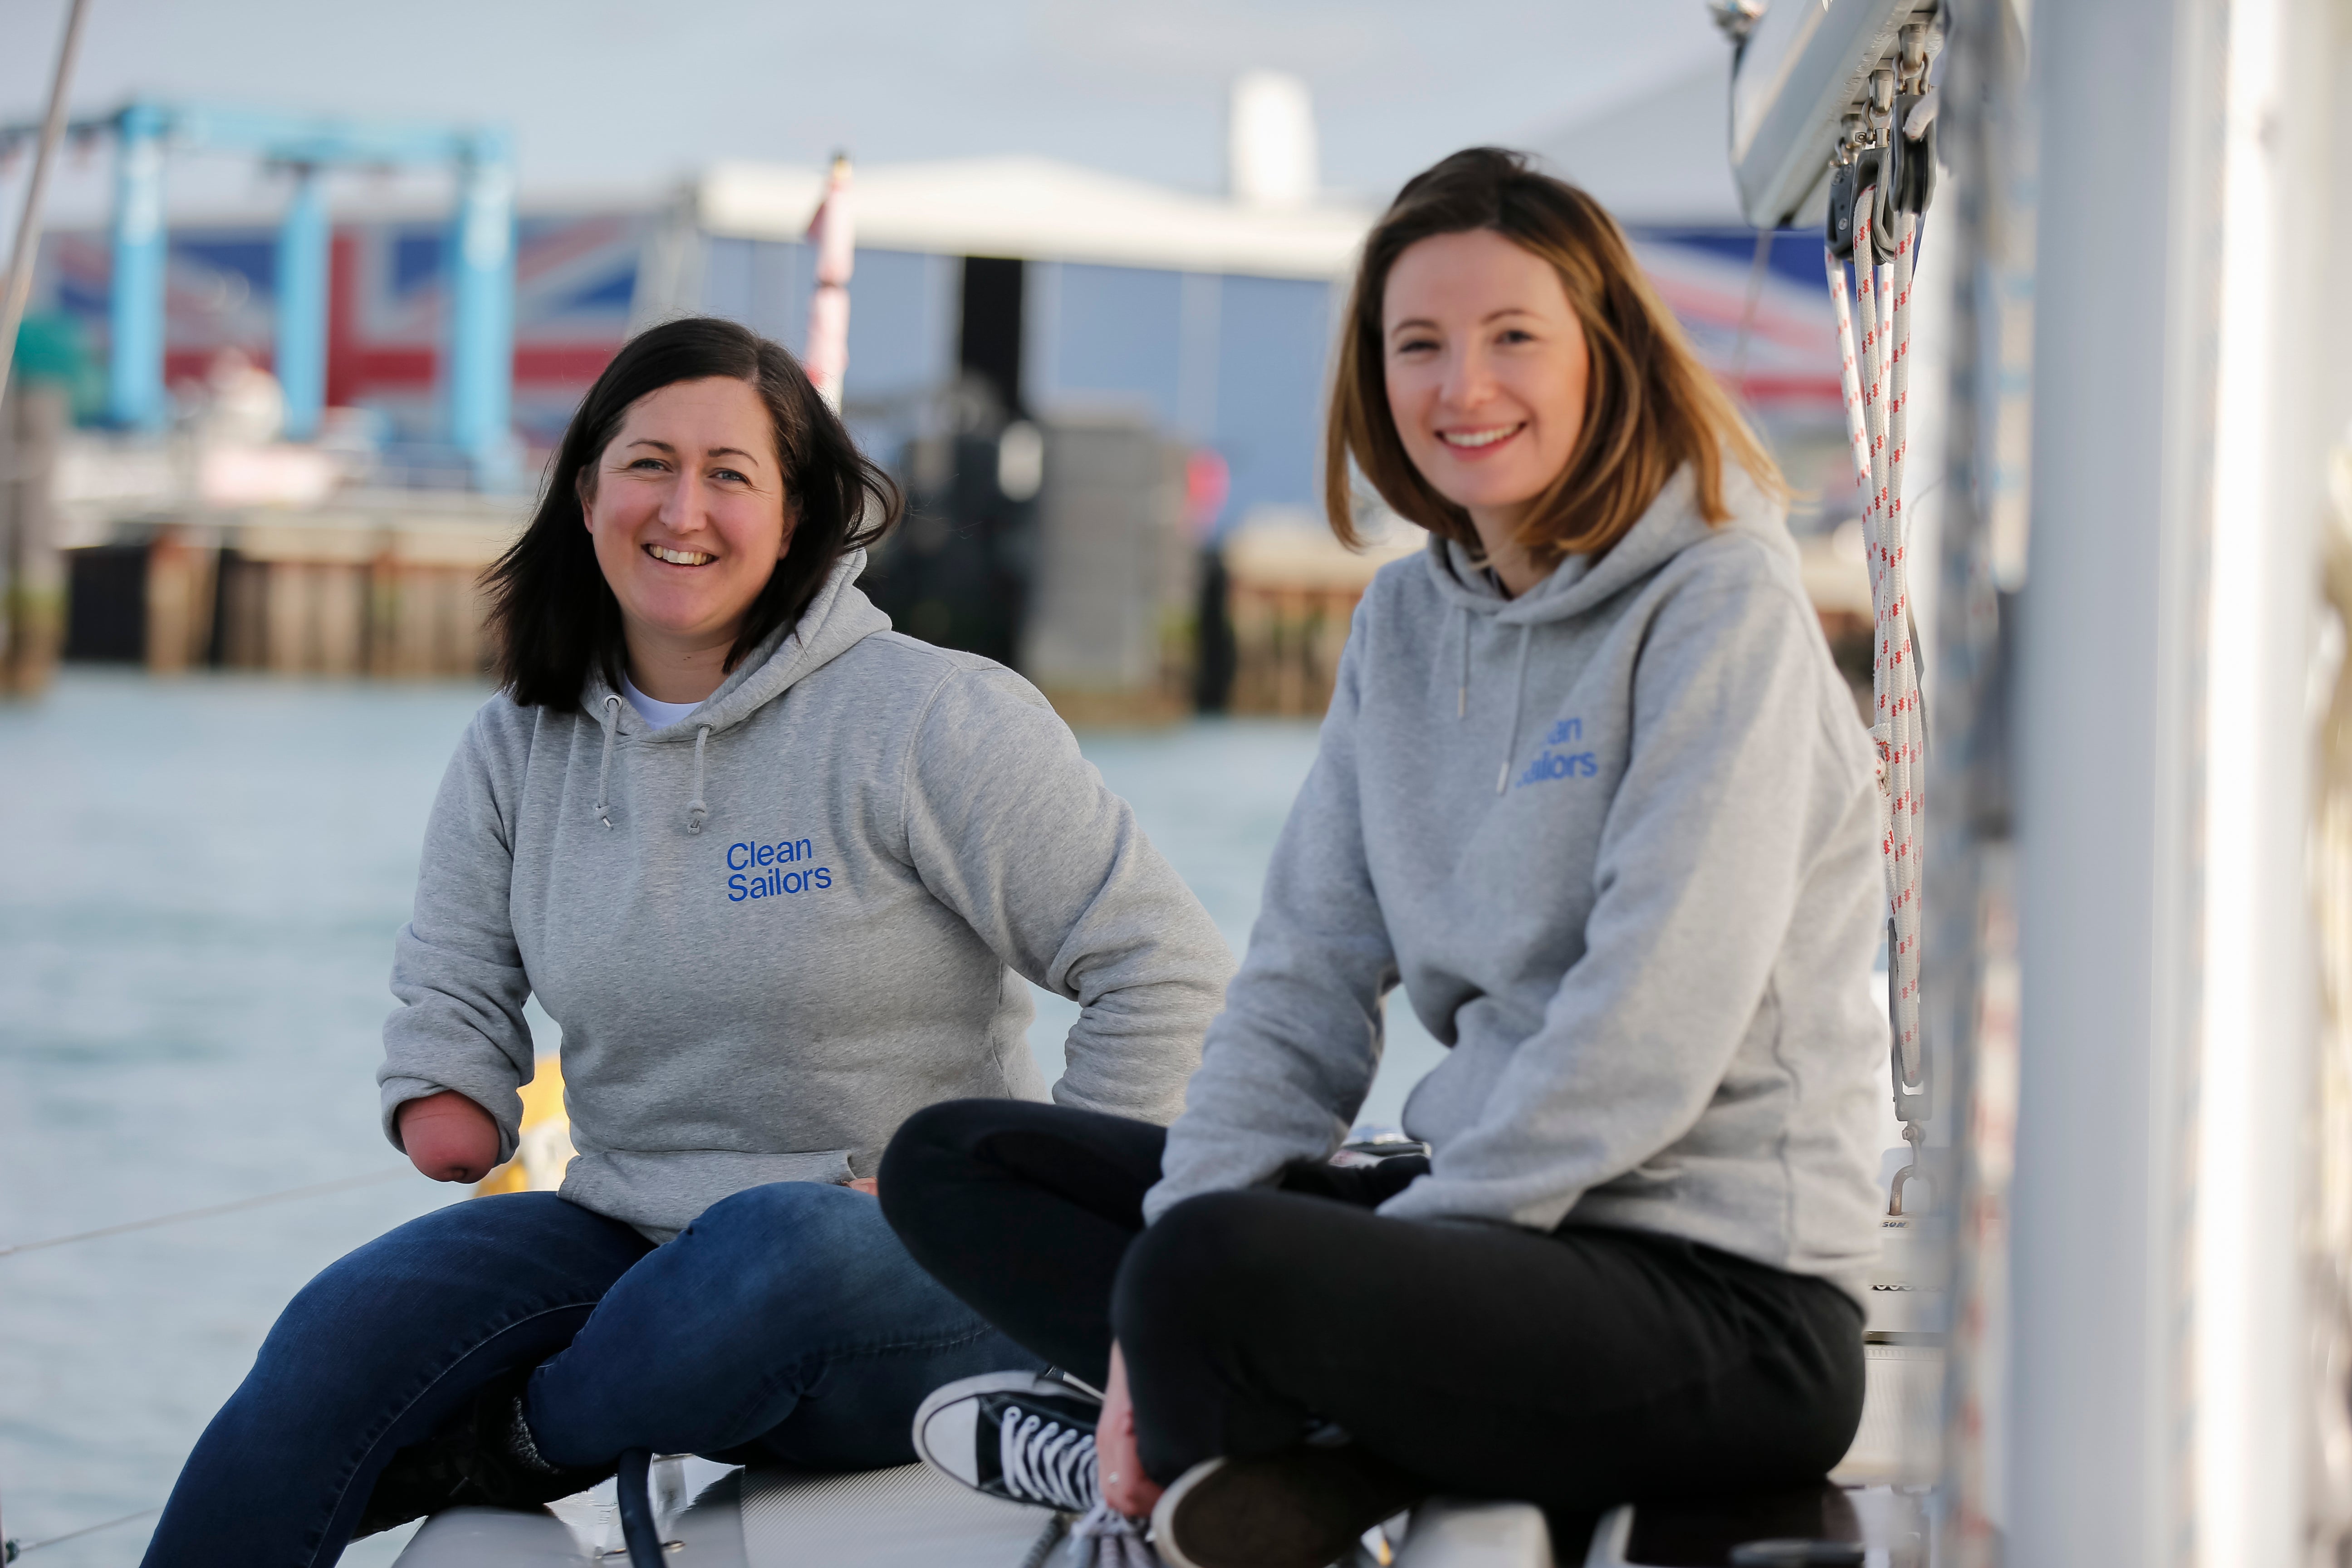 World Champion and four-time Paralympian, Hannah Stodel, joins Clean Sailors